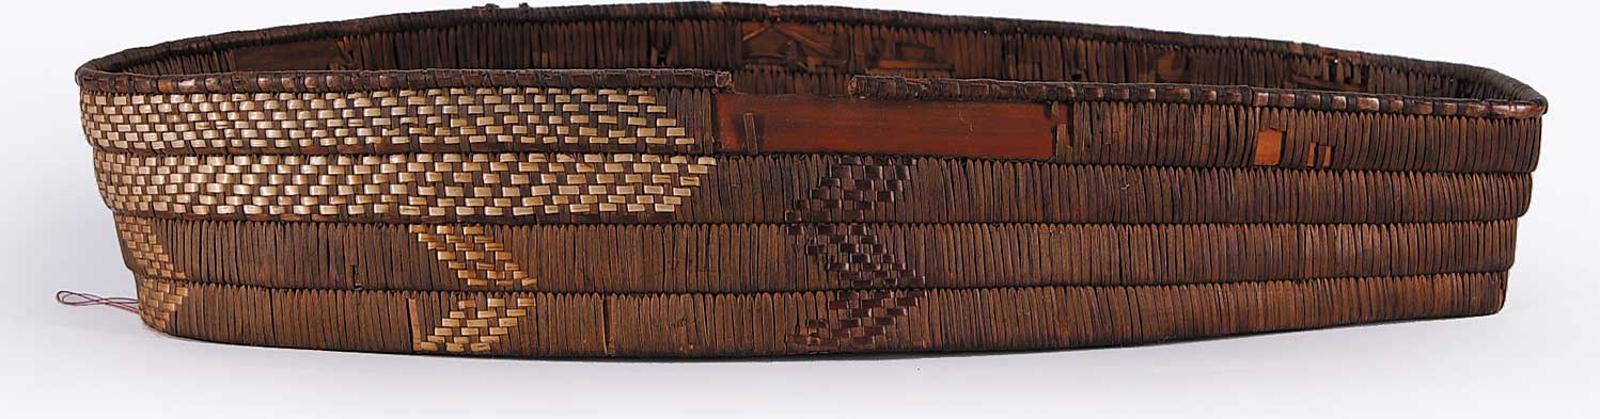 First Nations Basket School - Three Tone Basket Squared at One End